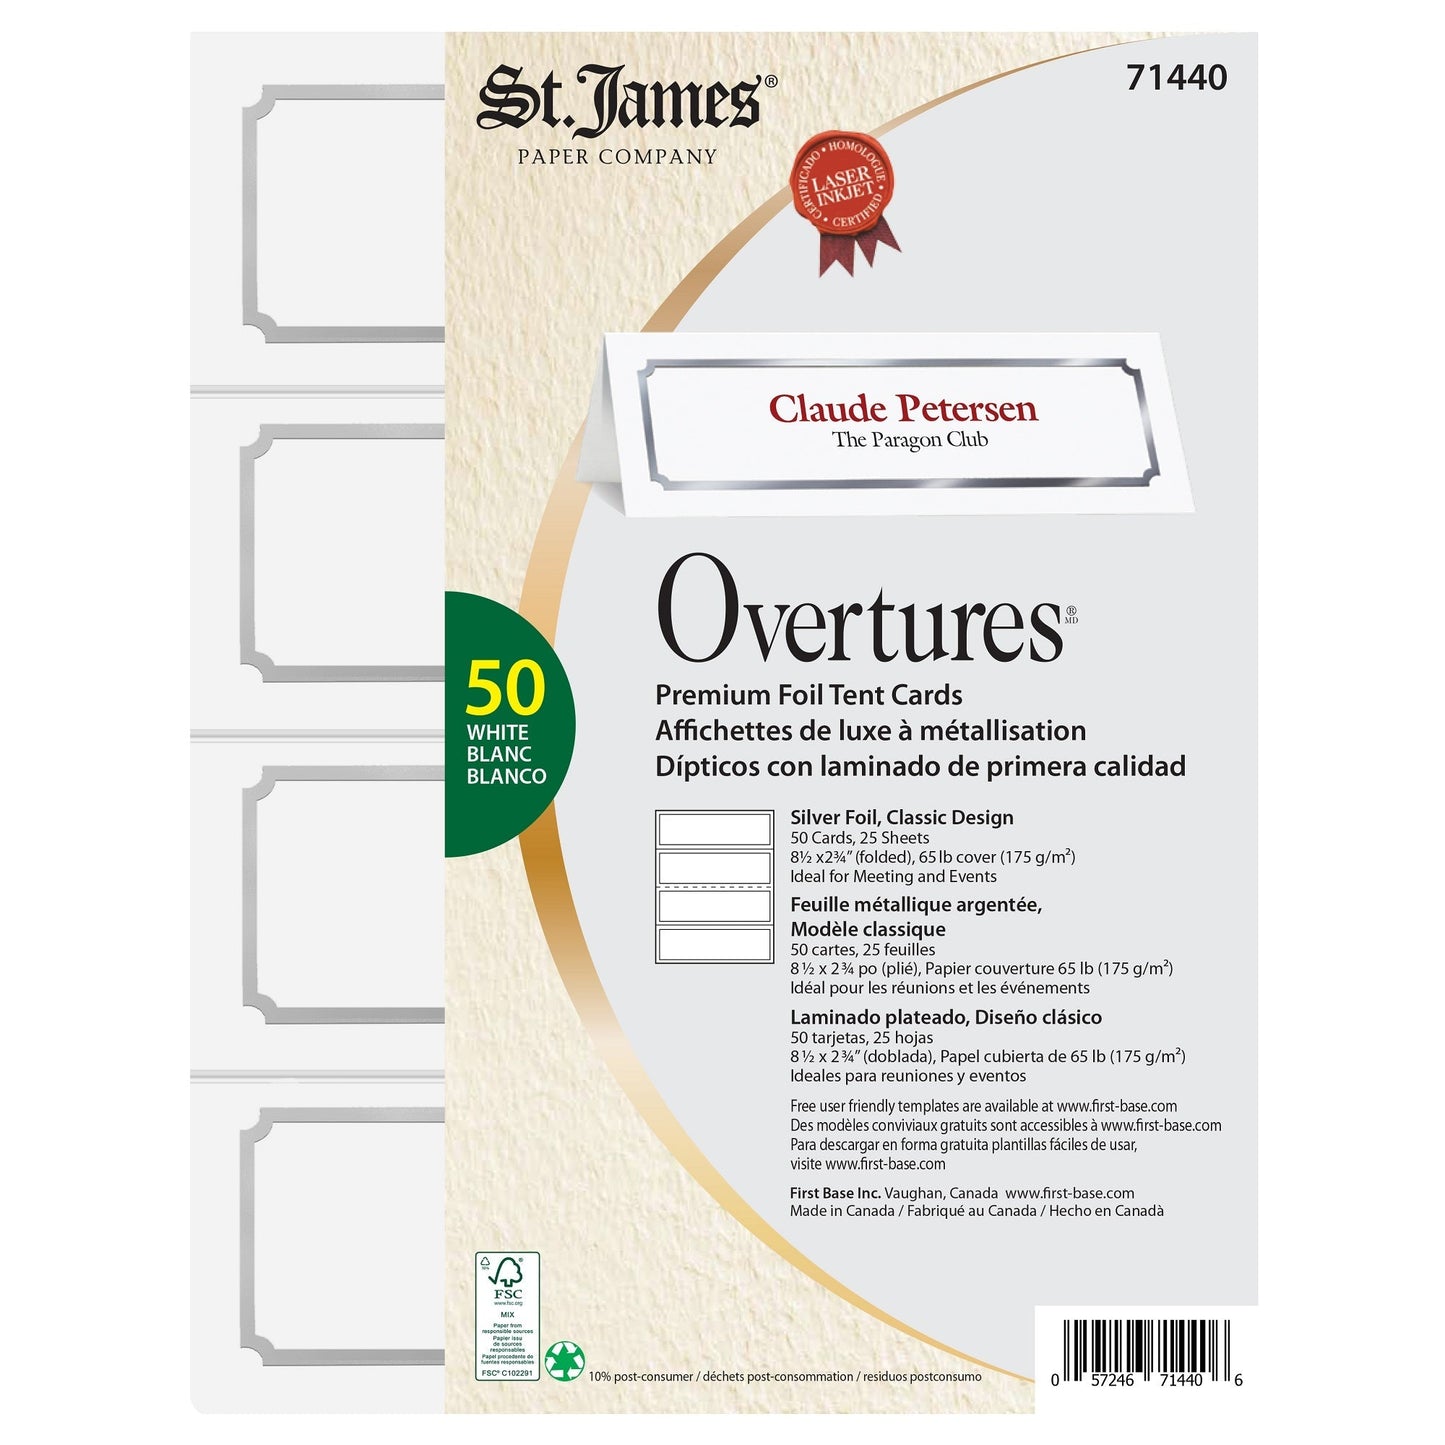 St. James® Overtures® Classic Tent Cards, White, Silver Foil, Fold to 8½ x 2¾", Pack of 50, 71440